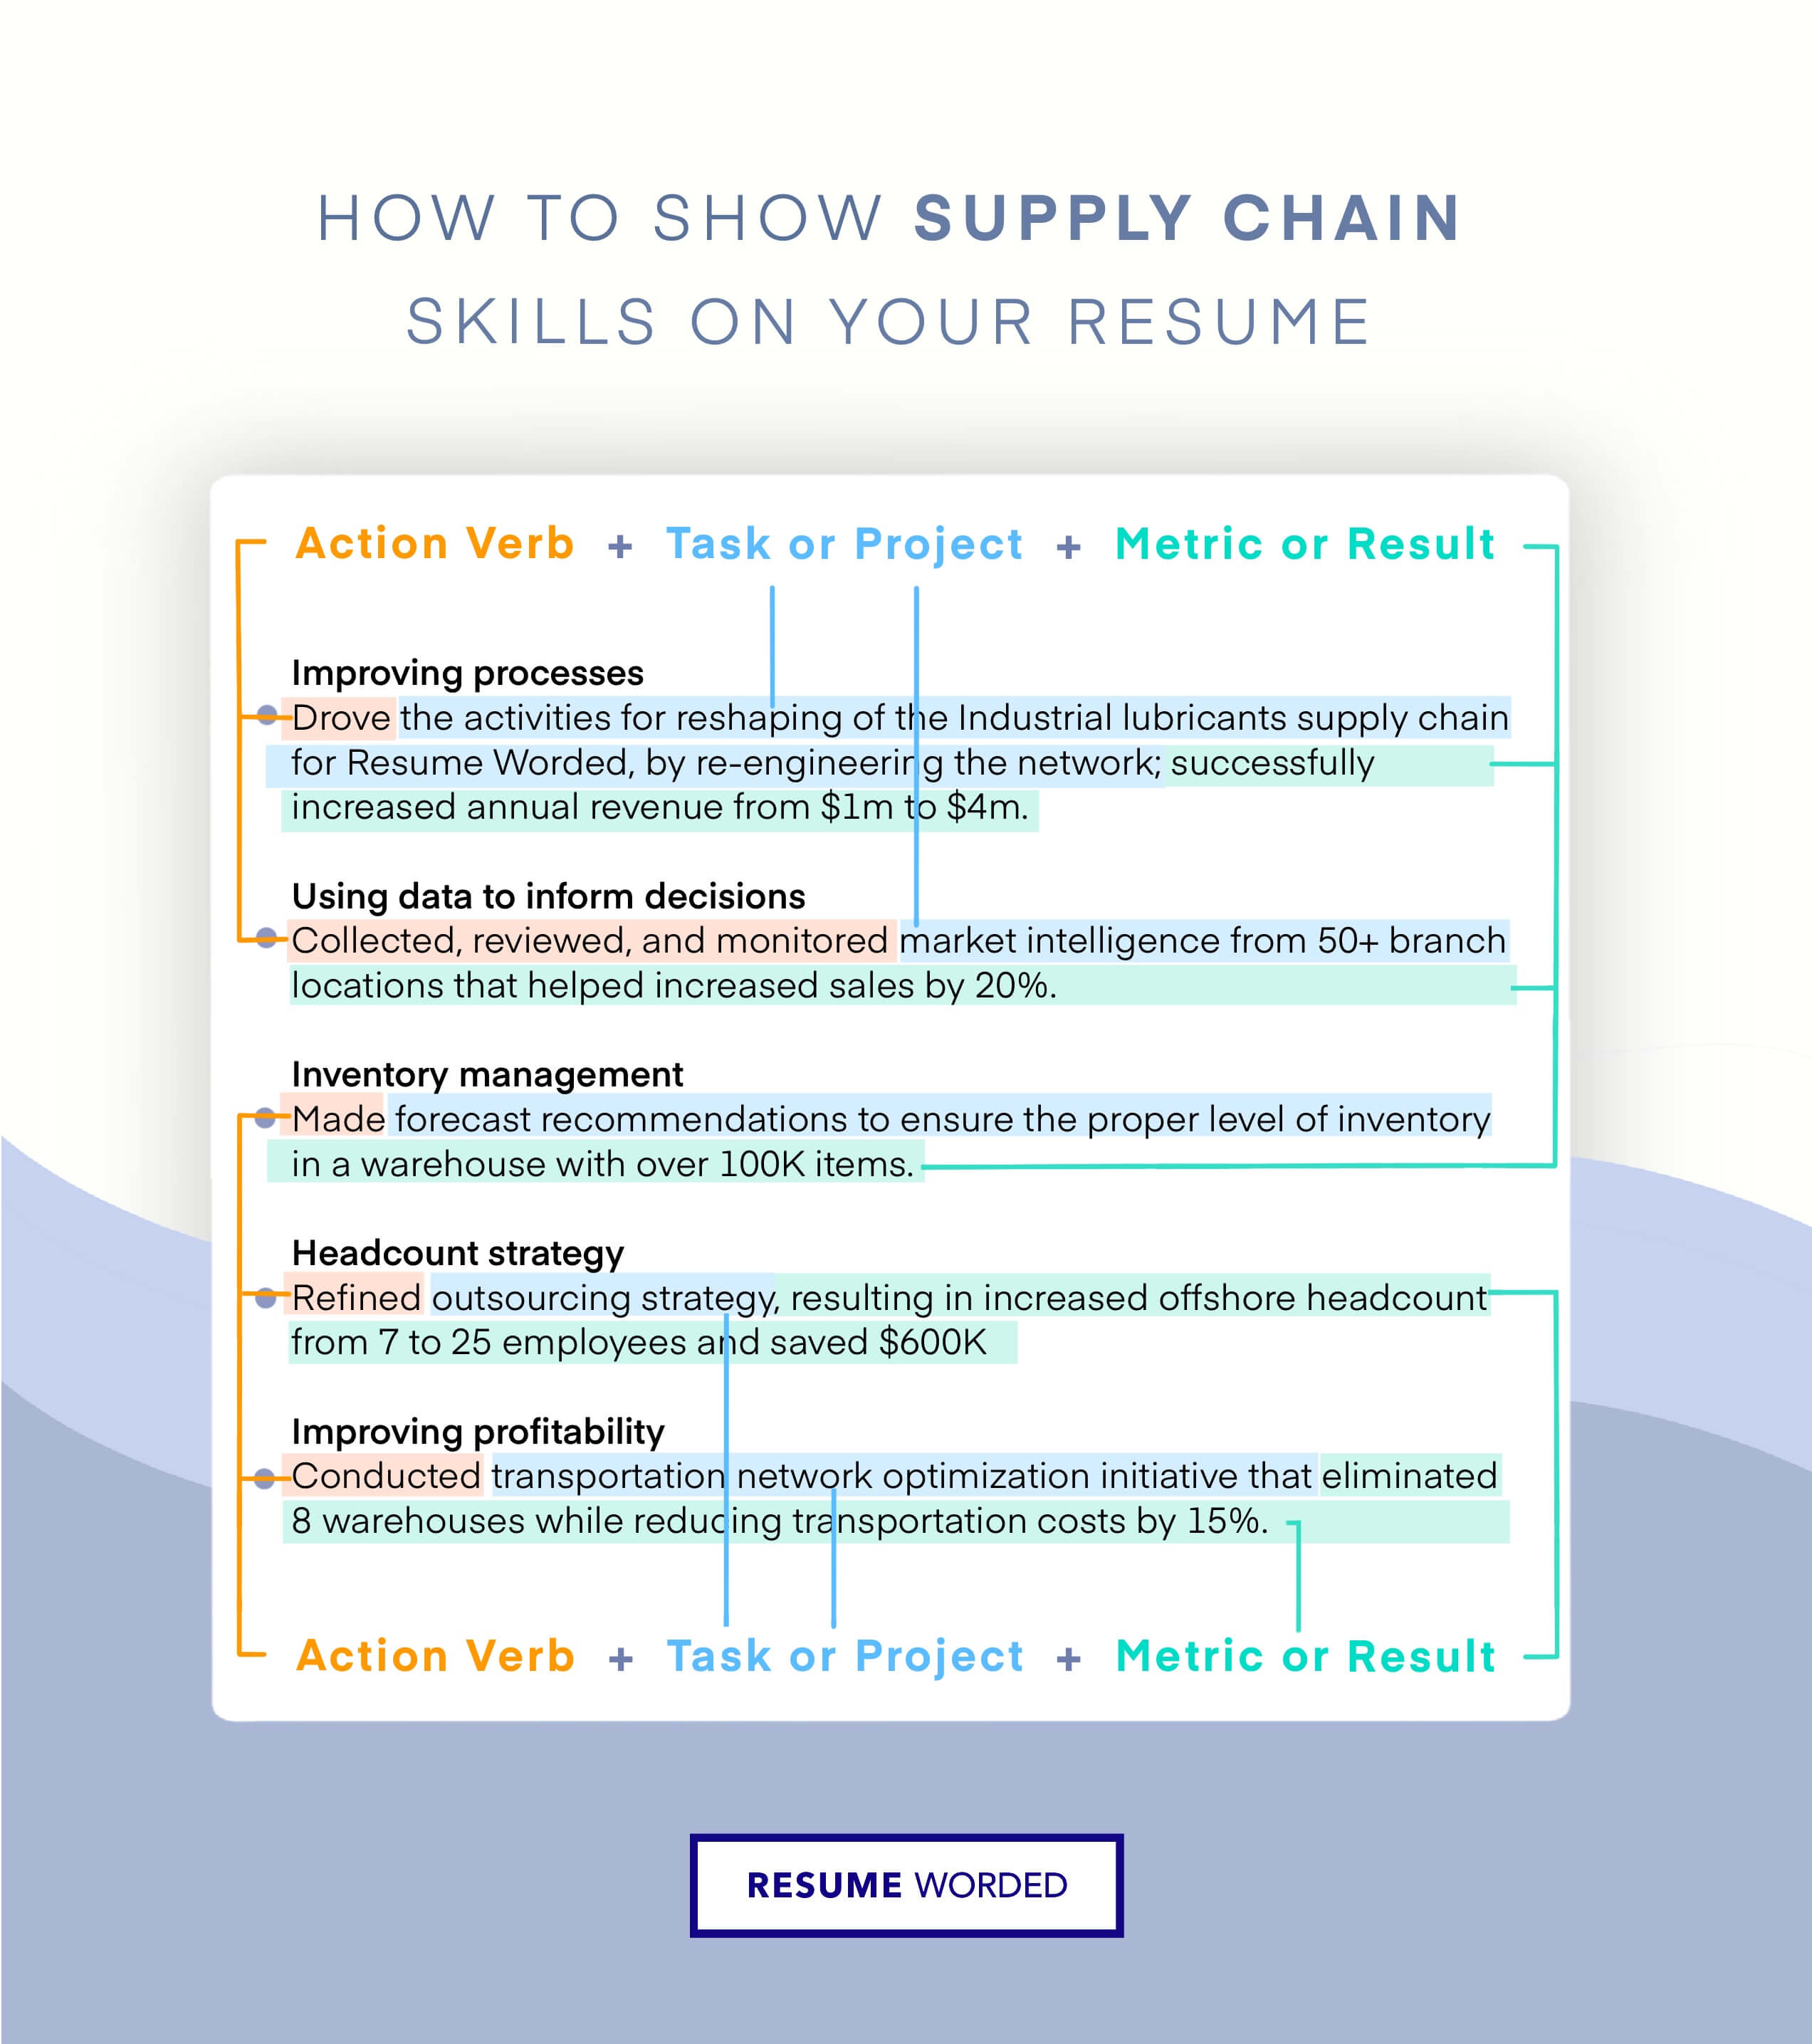 Showcase your leadership in handling supply chain disruptions - Warehouse Manager CV